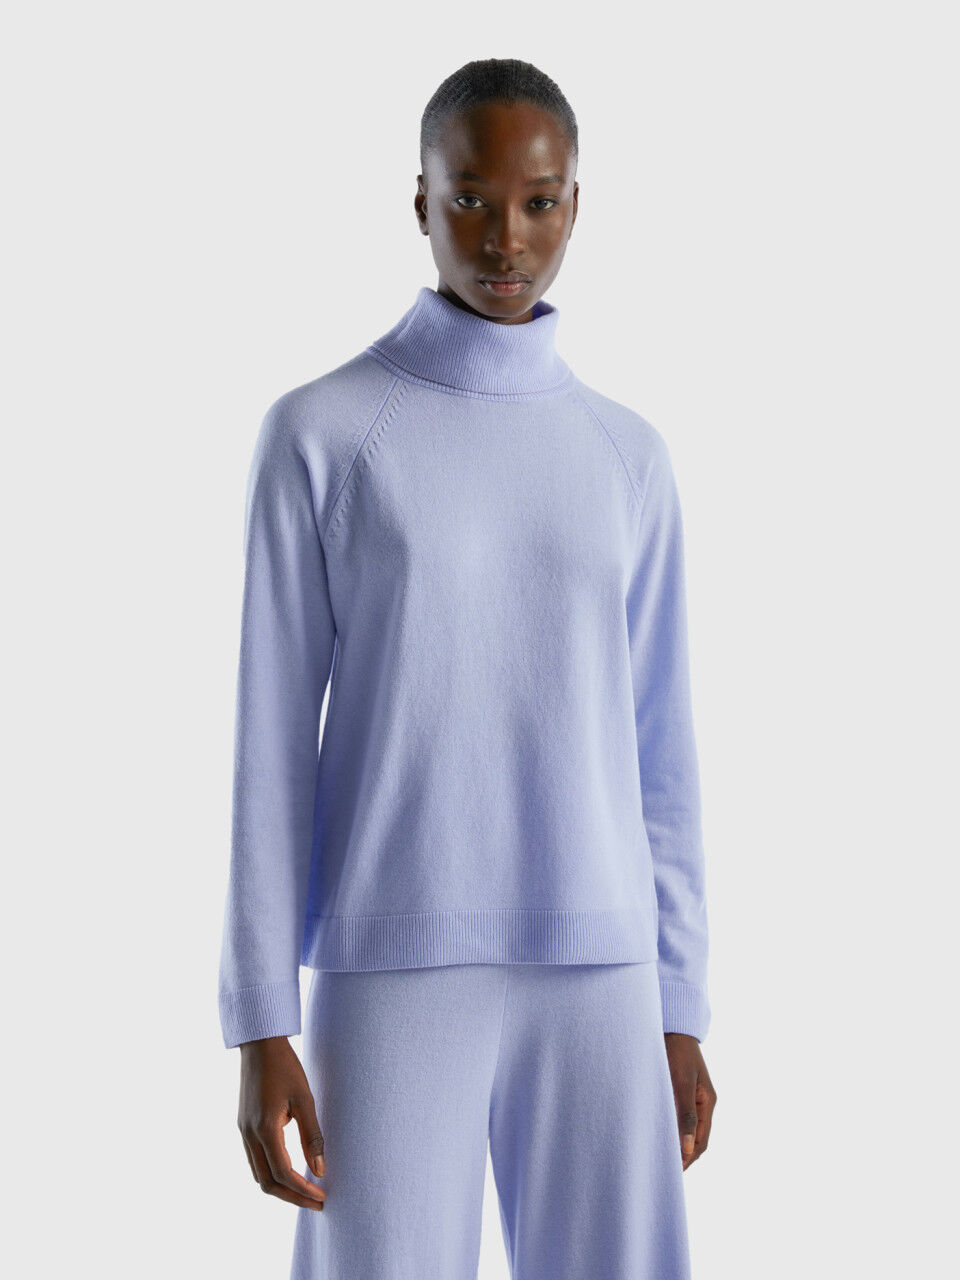 Light blue turtleneck in wool and cashmere blend